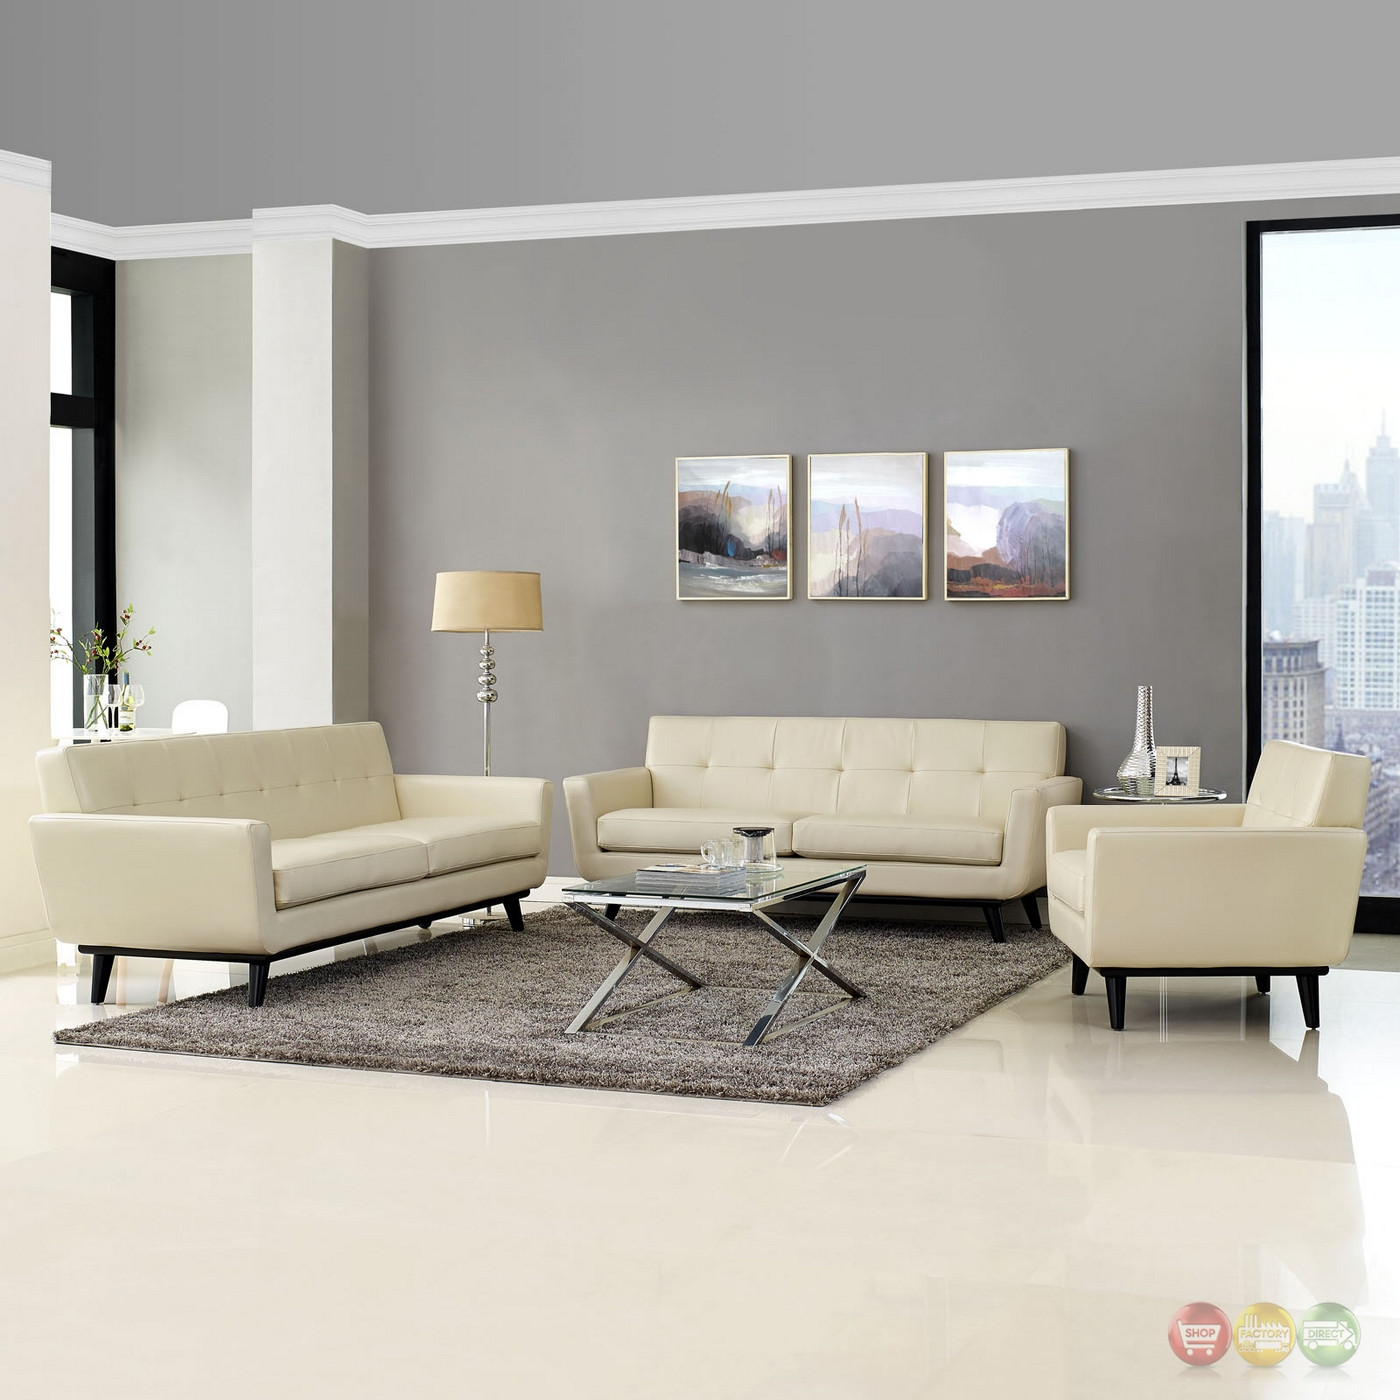 Modern Leather Living Room Set
 Engage Contemporary 3pc Button tufted Leather Living Room